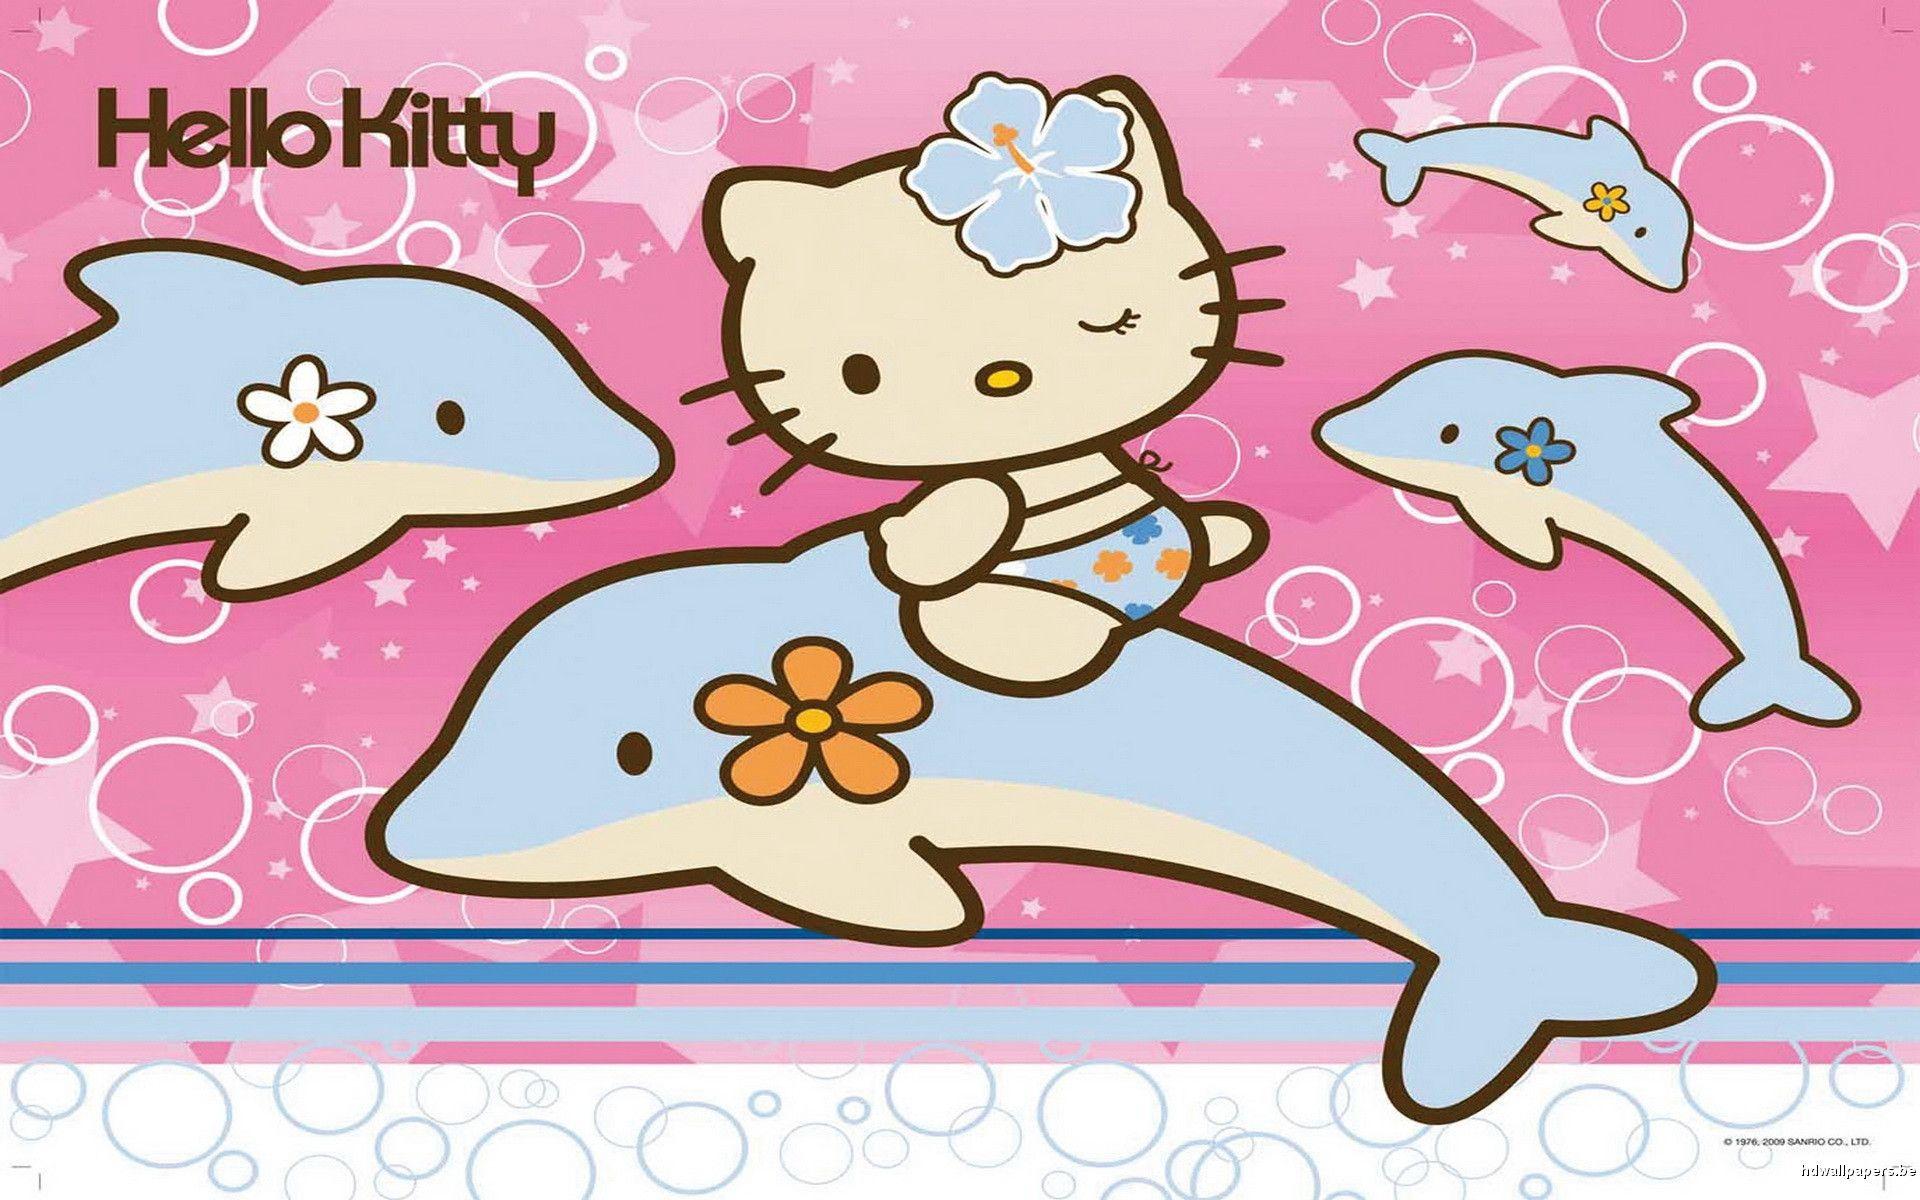 Hello Kitty Cute Image Backgrounds - Wallpaper Cave